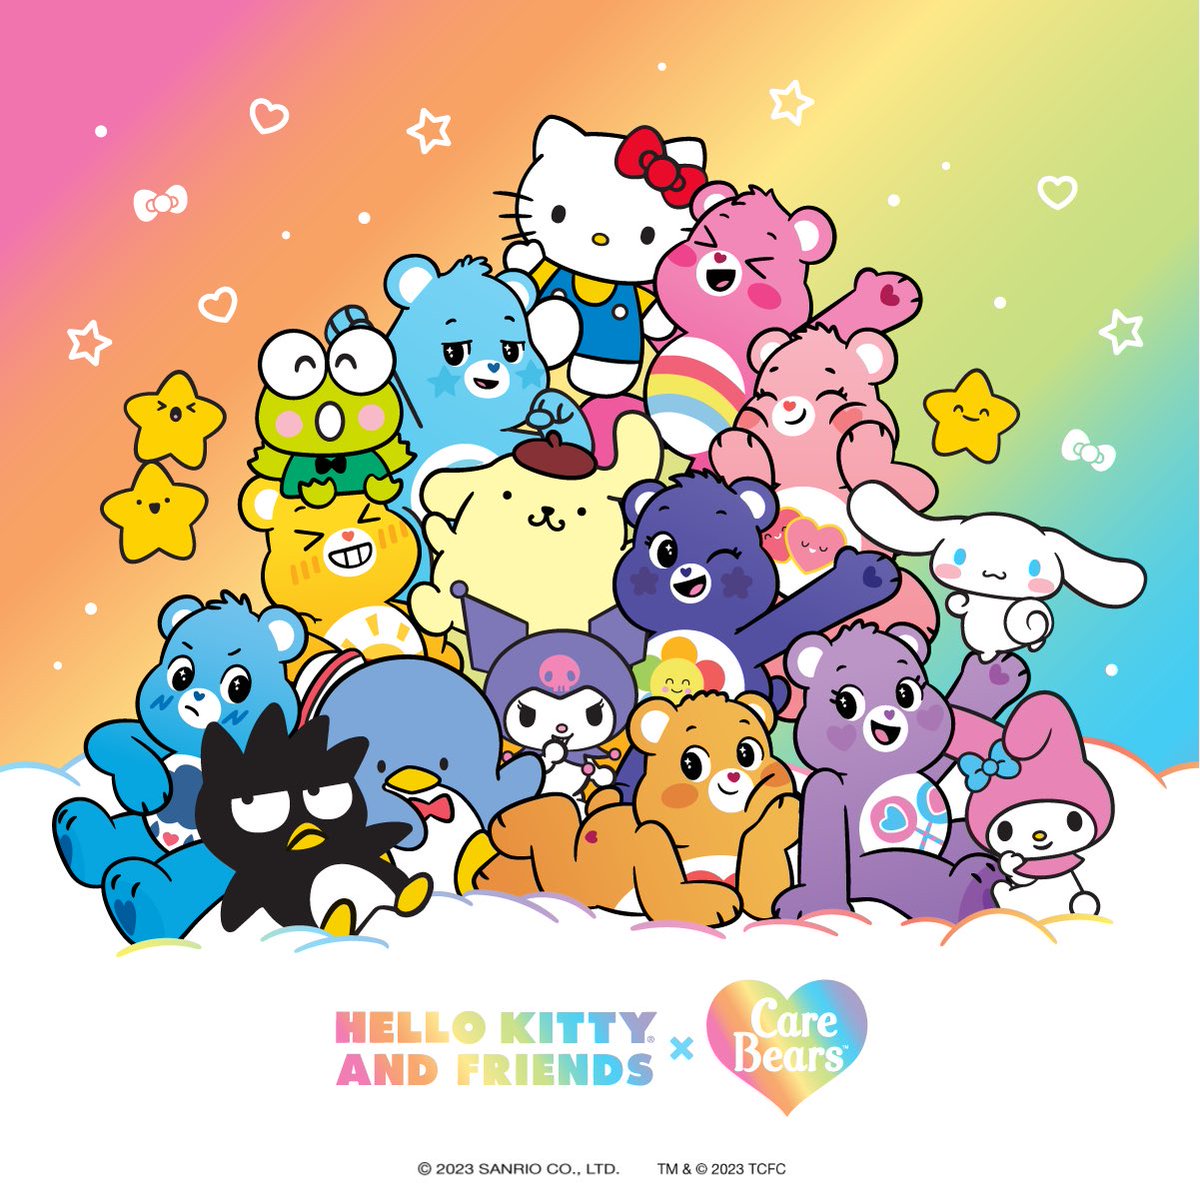 You can never have too many friends 🌈🎀 Hello Kitty and Friends x Care Bears is coming very soon! #HelloKittyxCareBears #CareBearsBearyBesties